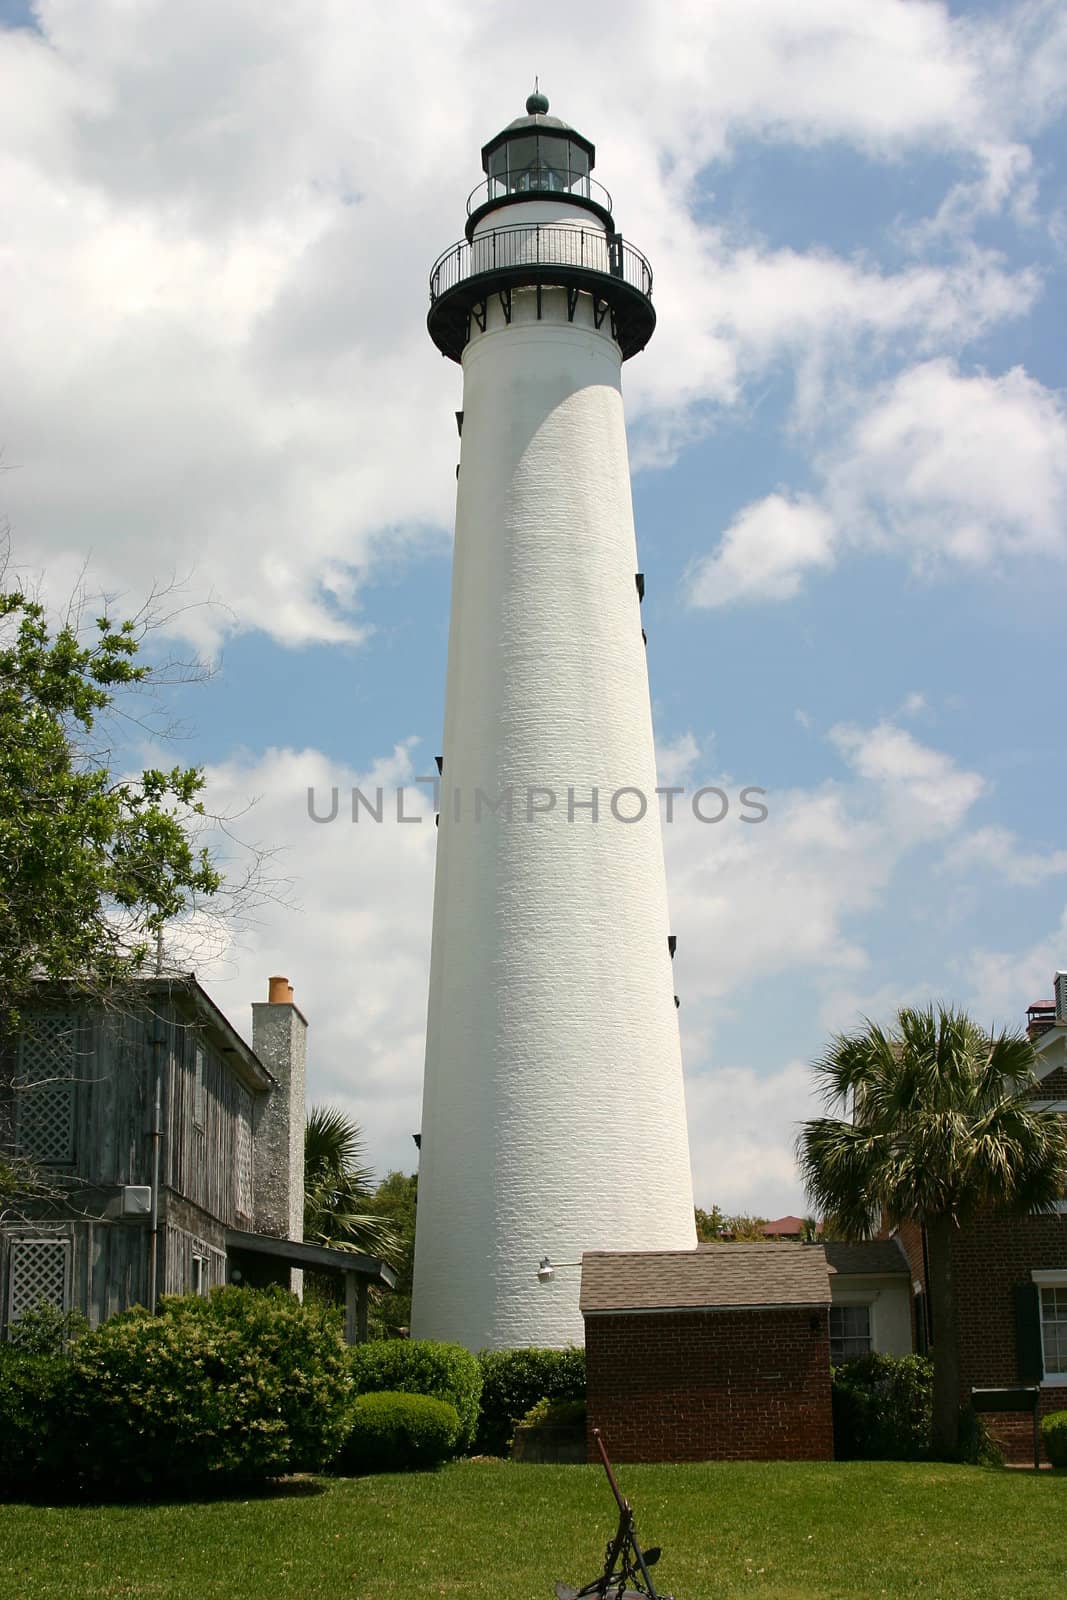 This is the side view of the lighthouse on St. Simons Island, Georgia viewing the shipping lanes of the Atlantic coast.